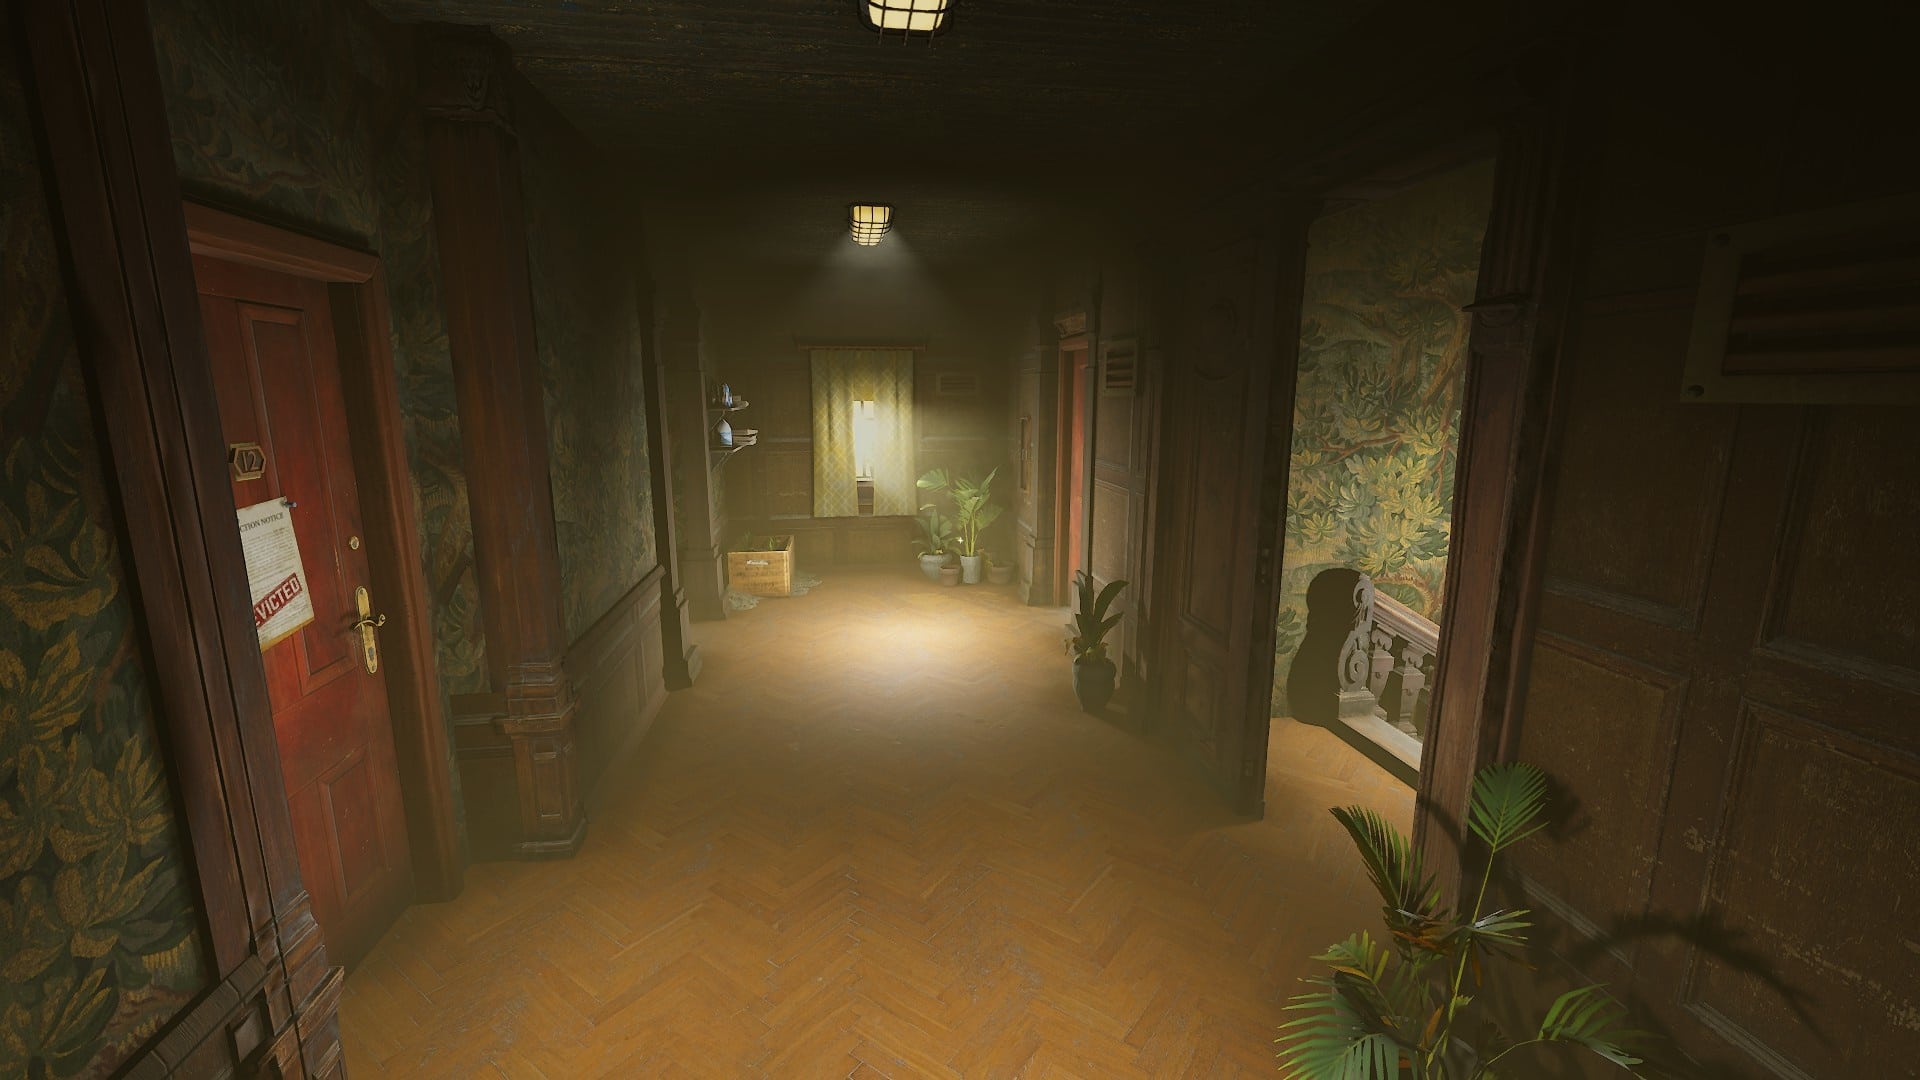 We don't see much more of the real world than this corridor and our flat (at least in the demo).